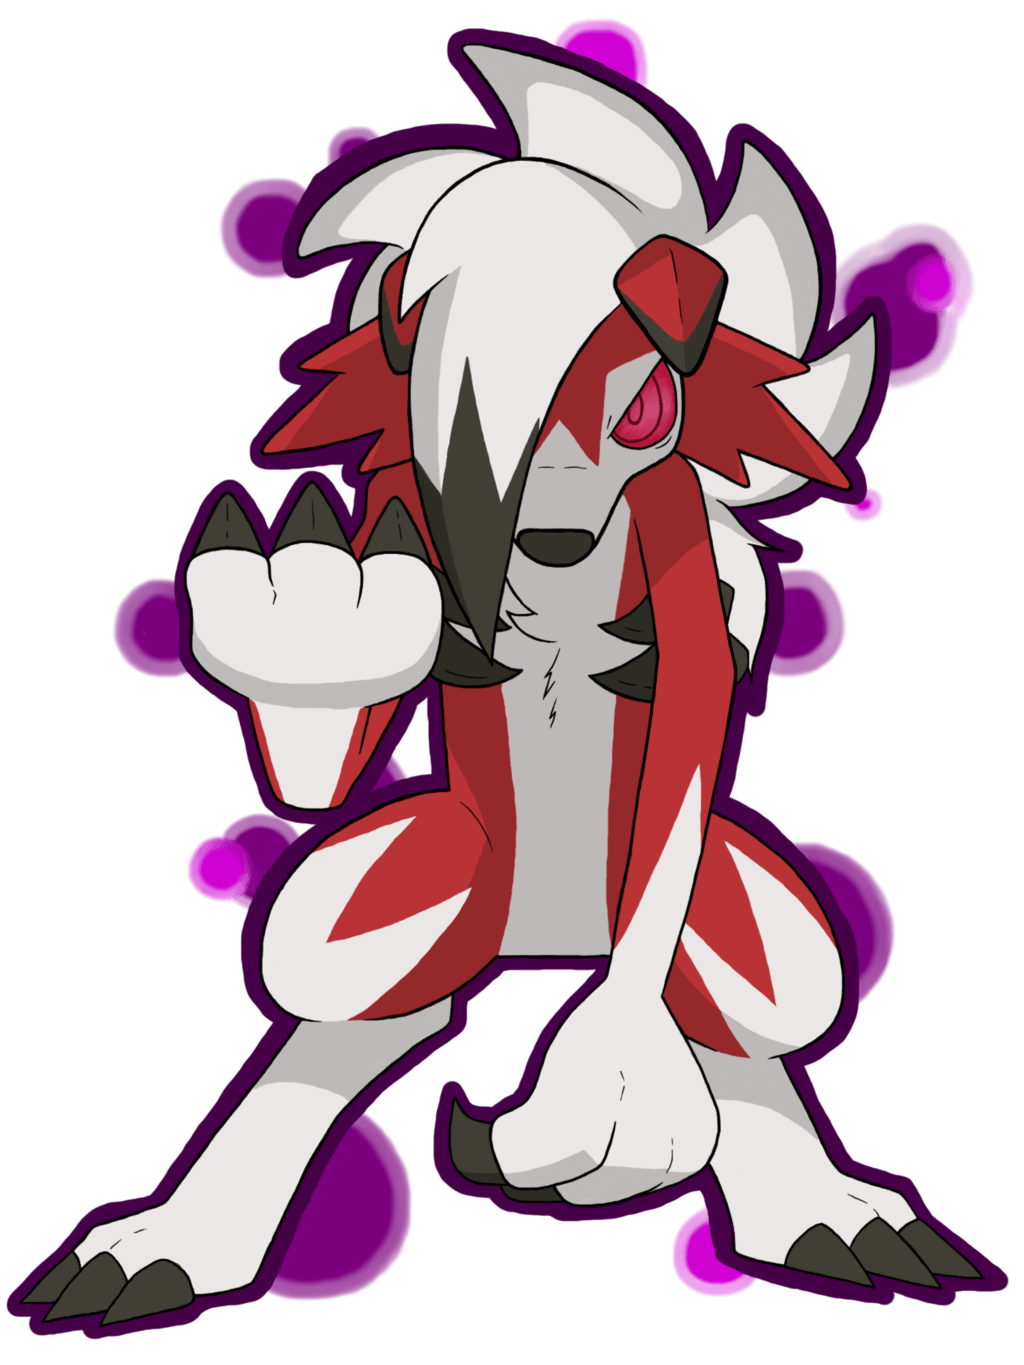 EDIT: English name is Lycanroc Based on the recently revealed